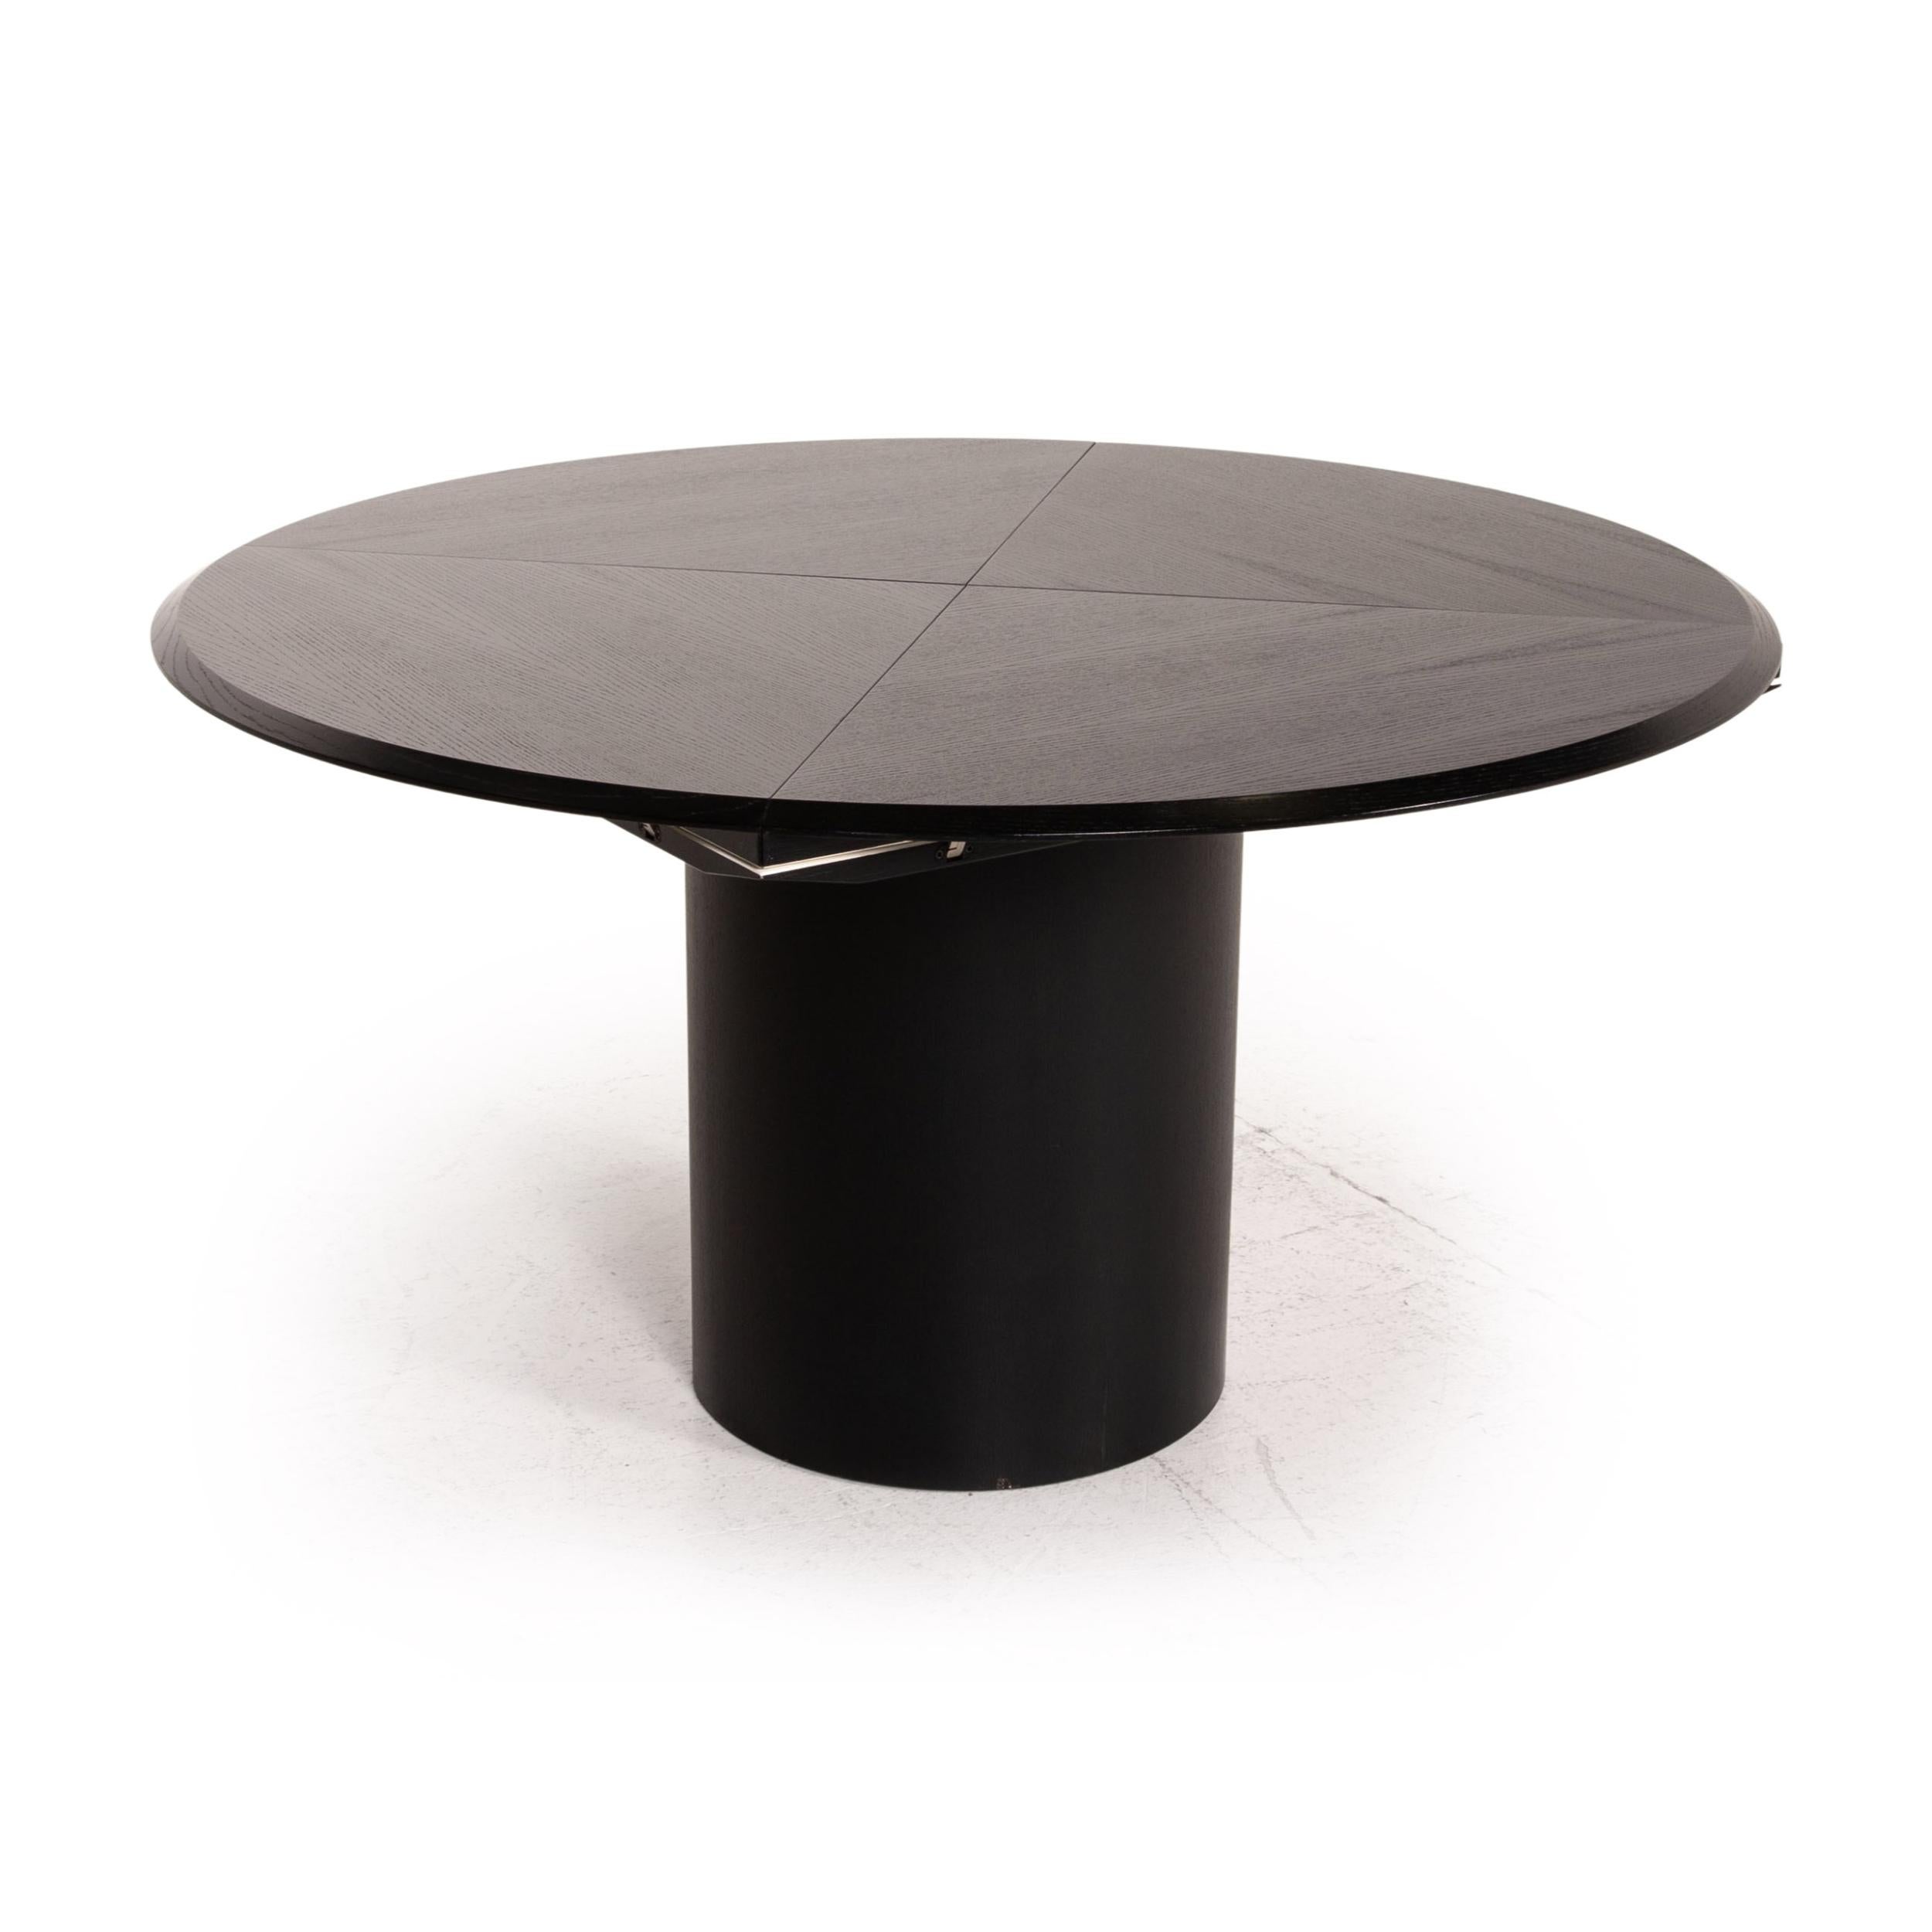 Wood Rosenthal Quadrondo Dining Table Round Black and White Foldable Function Square